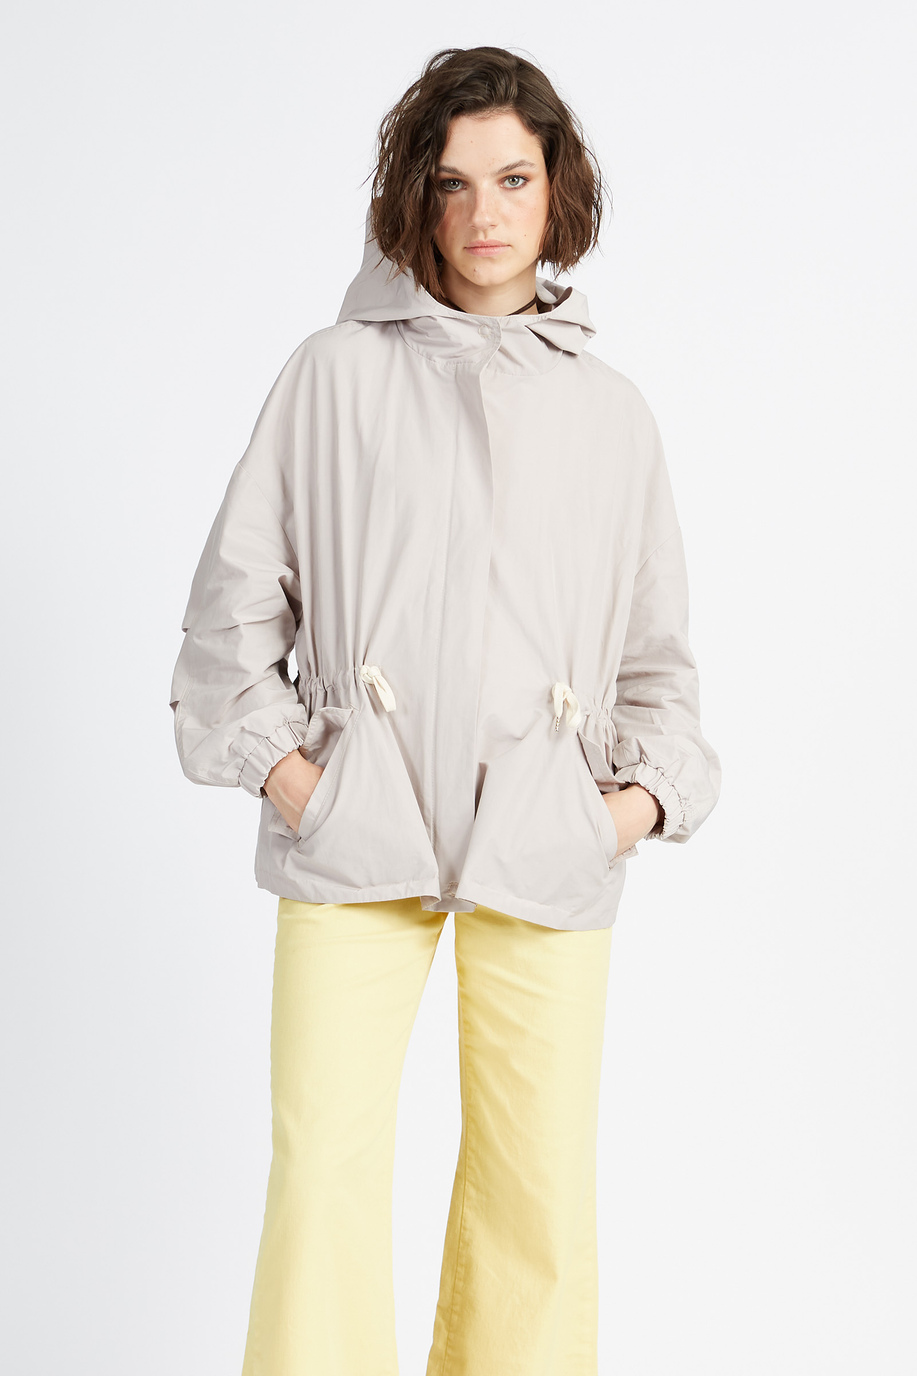 Solid color women's capsule Spring Weekend trench jacket with pockets - Vandani - Outerwear | La Martina - Official Online Shop